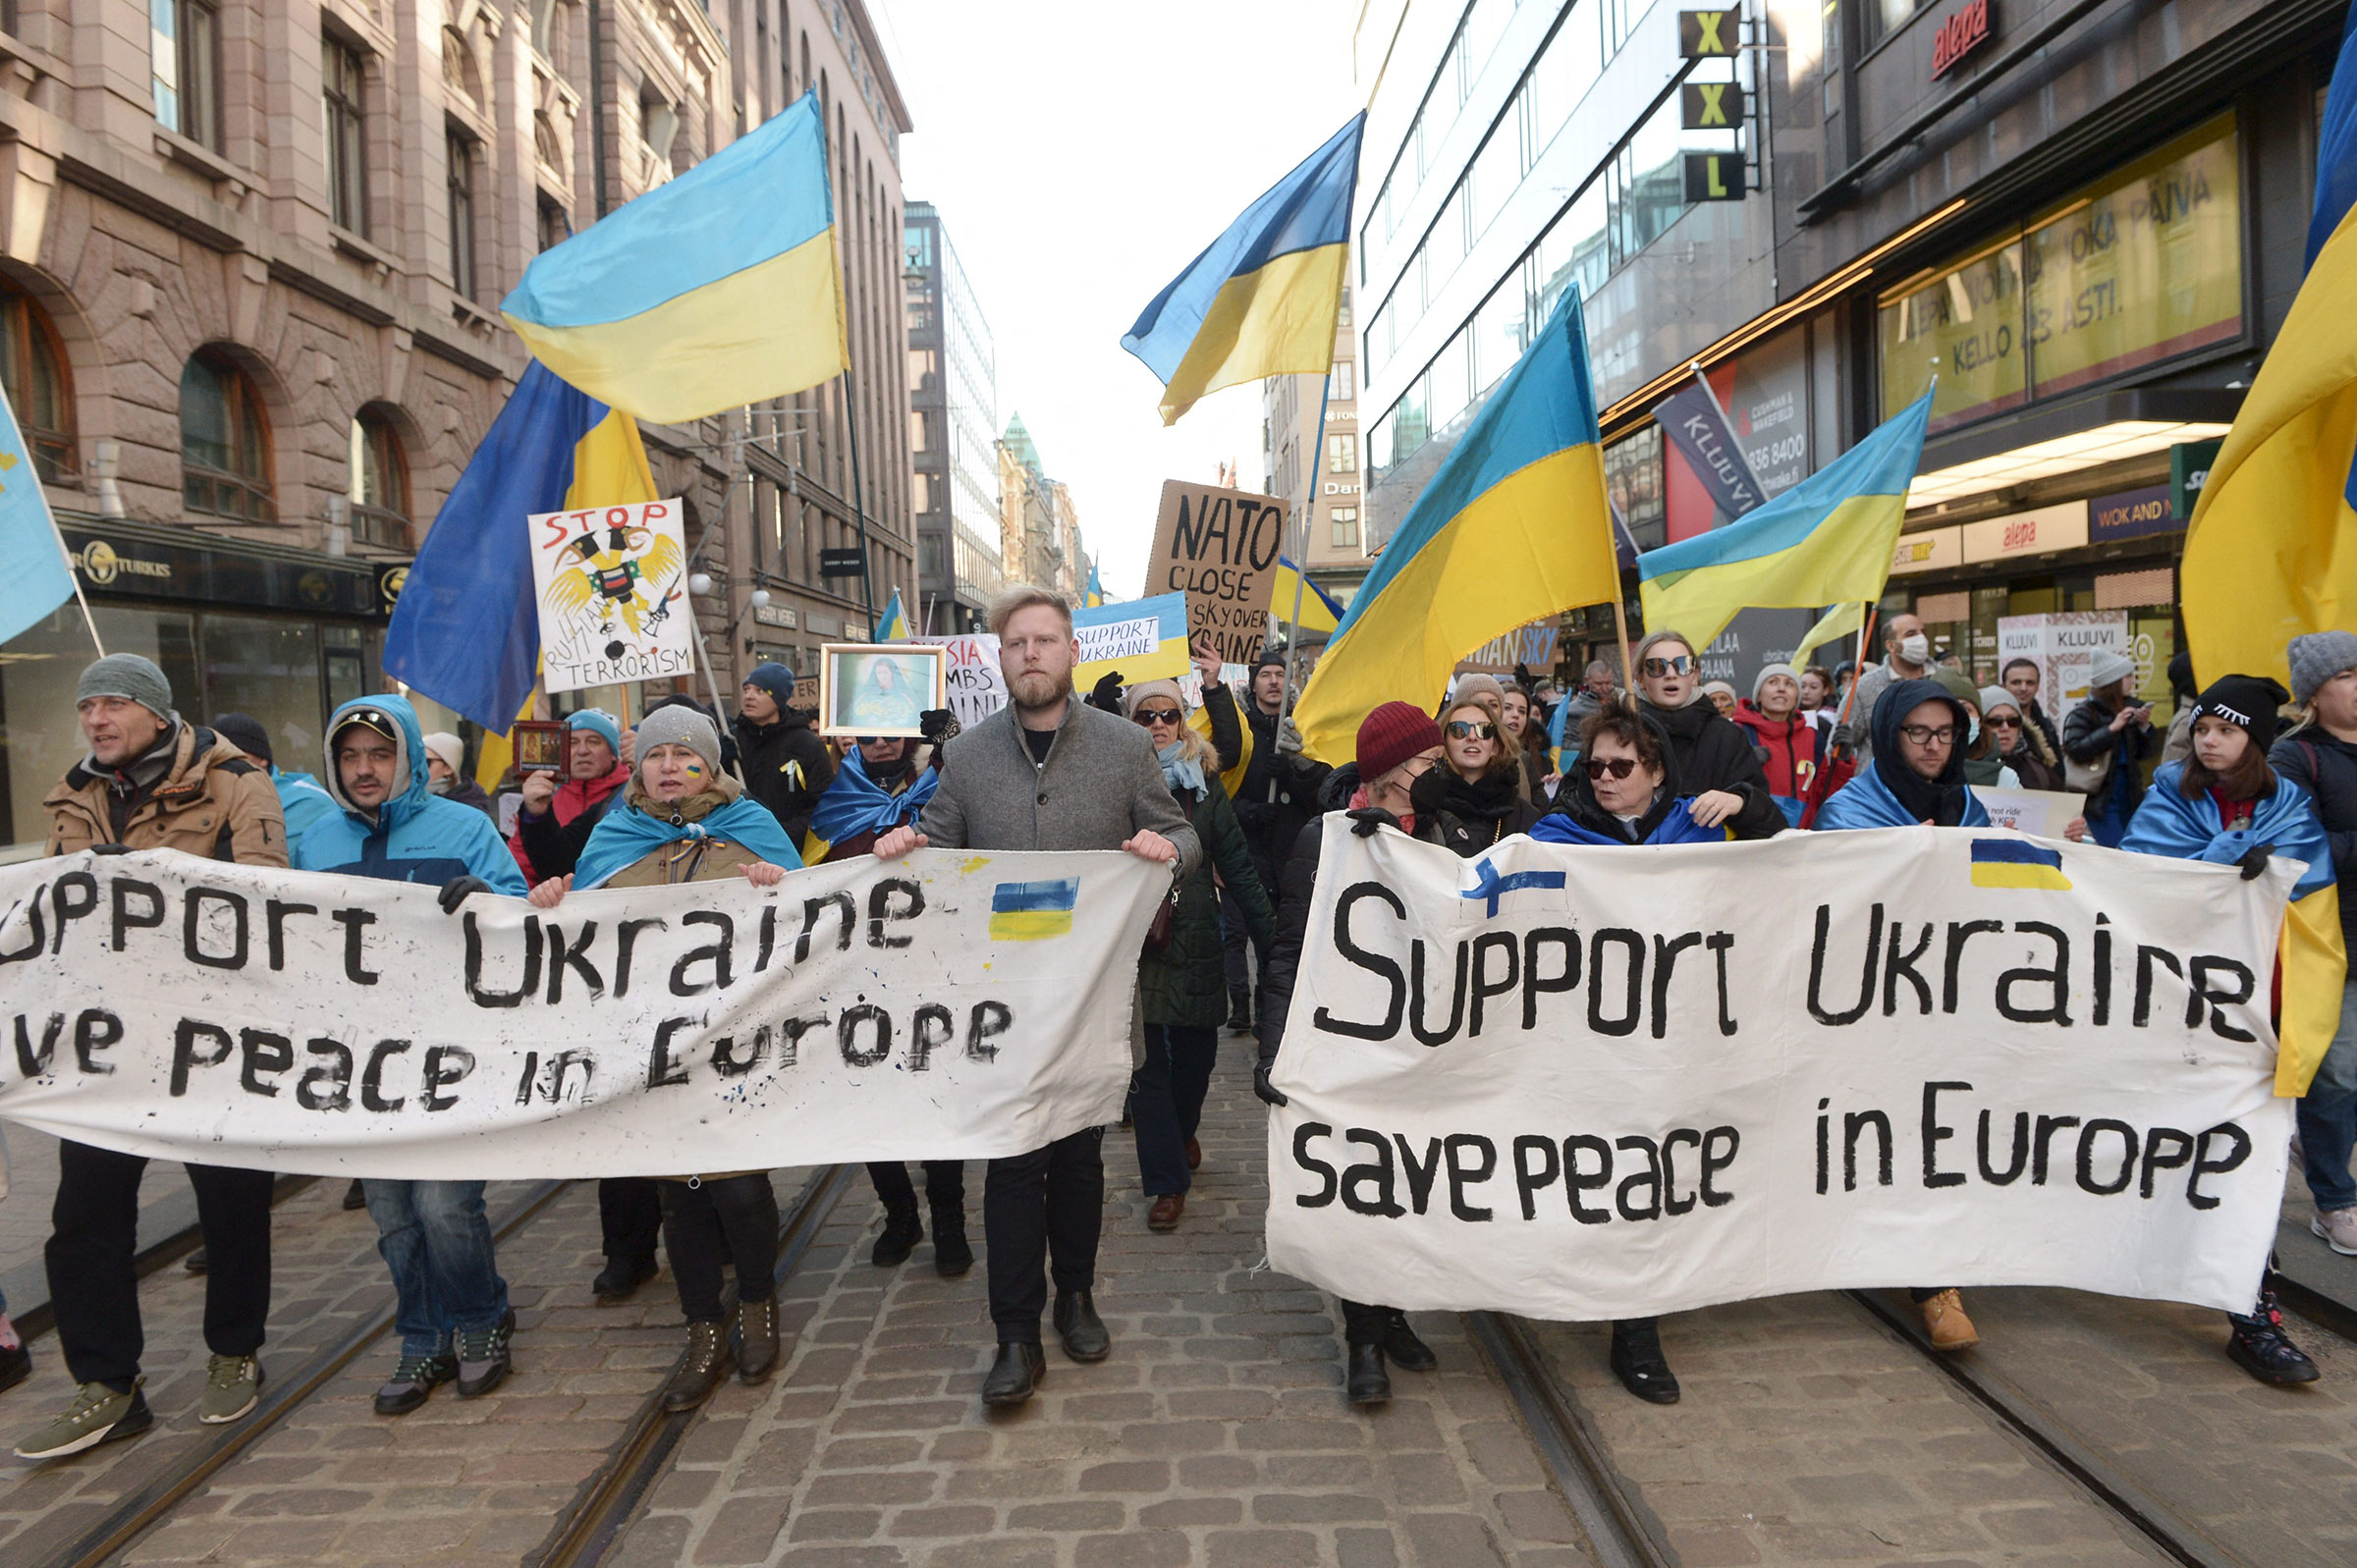 Protestors show their support for Ukraine as they take part in a demonstration against Russia's invasion of Ukraine, in Helsinki on March 5, 2022. (Mikko Stig—Lehtikuva/AFP/Getty Images)